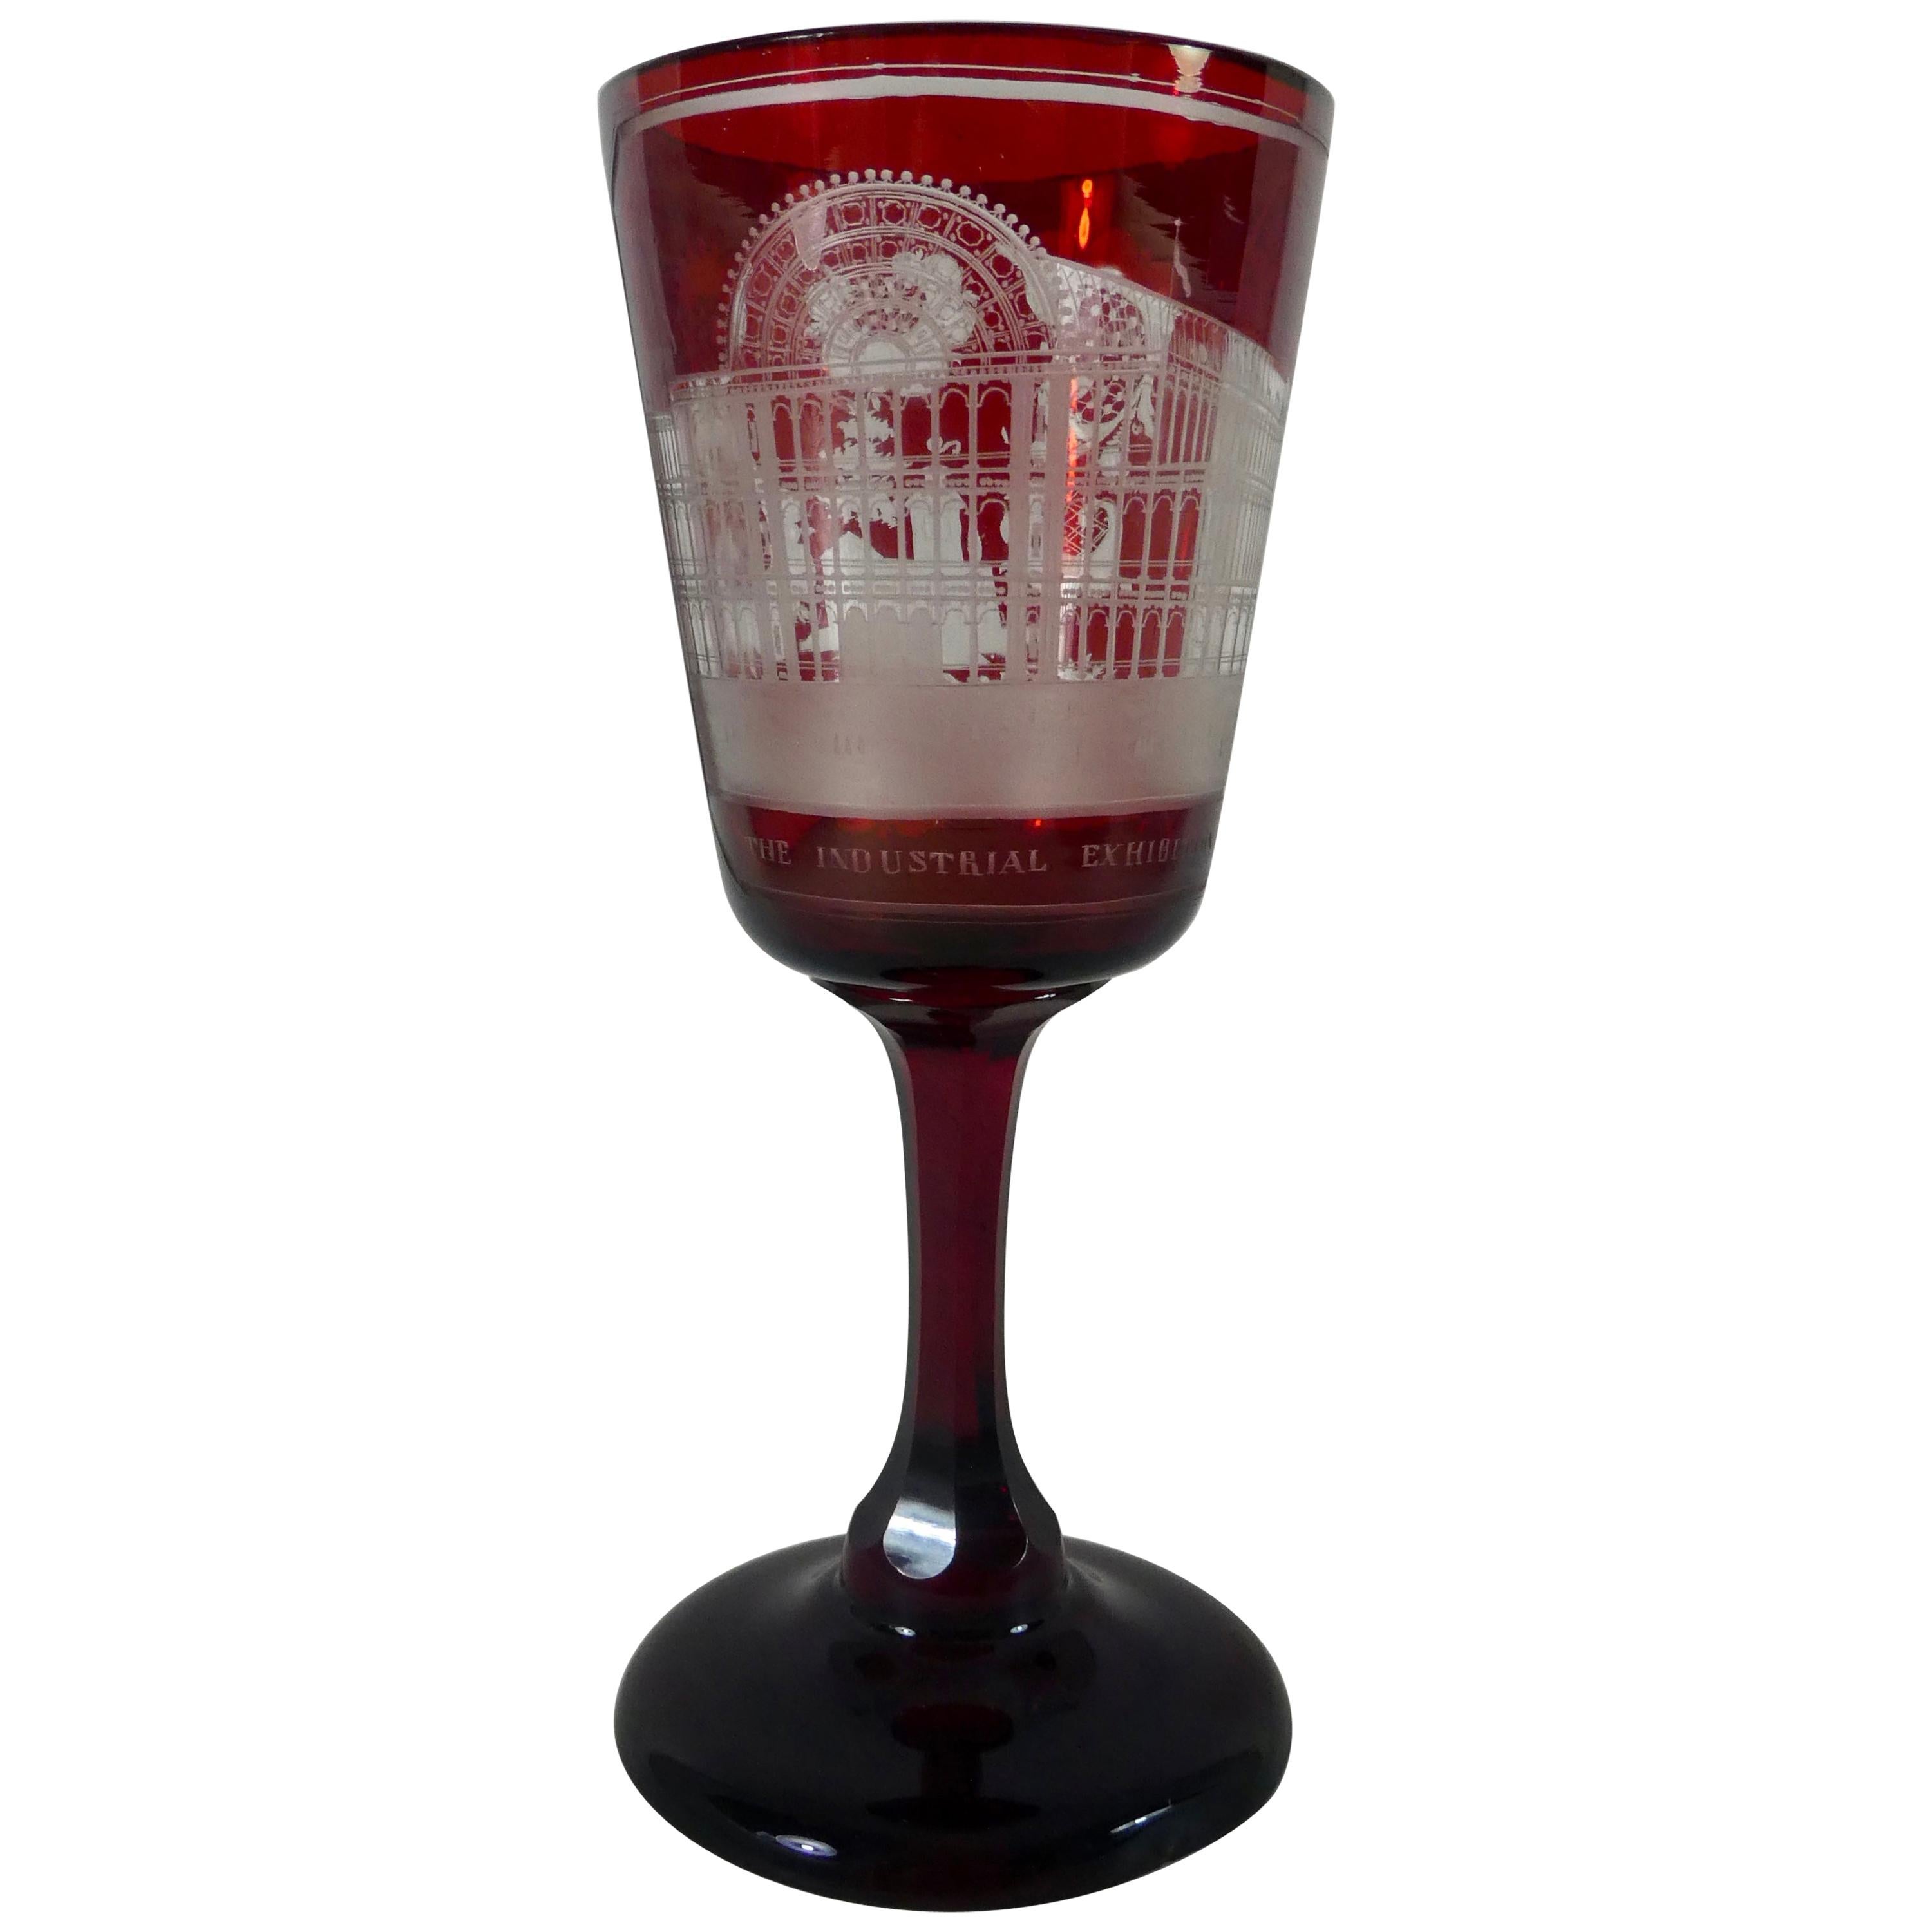 Crystal Palace Great Exhibition Commemorative Glass, 1851